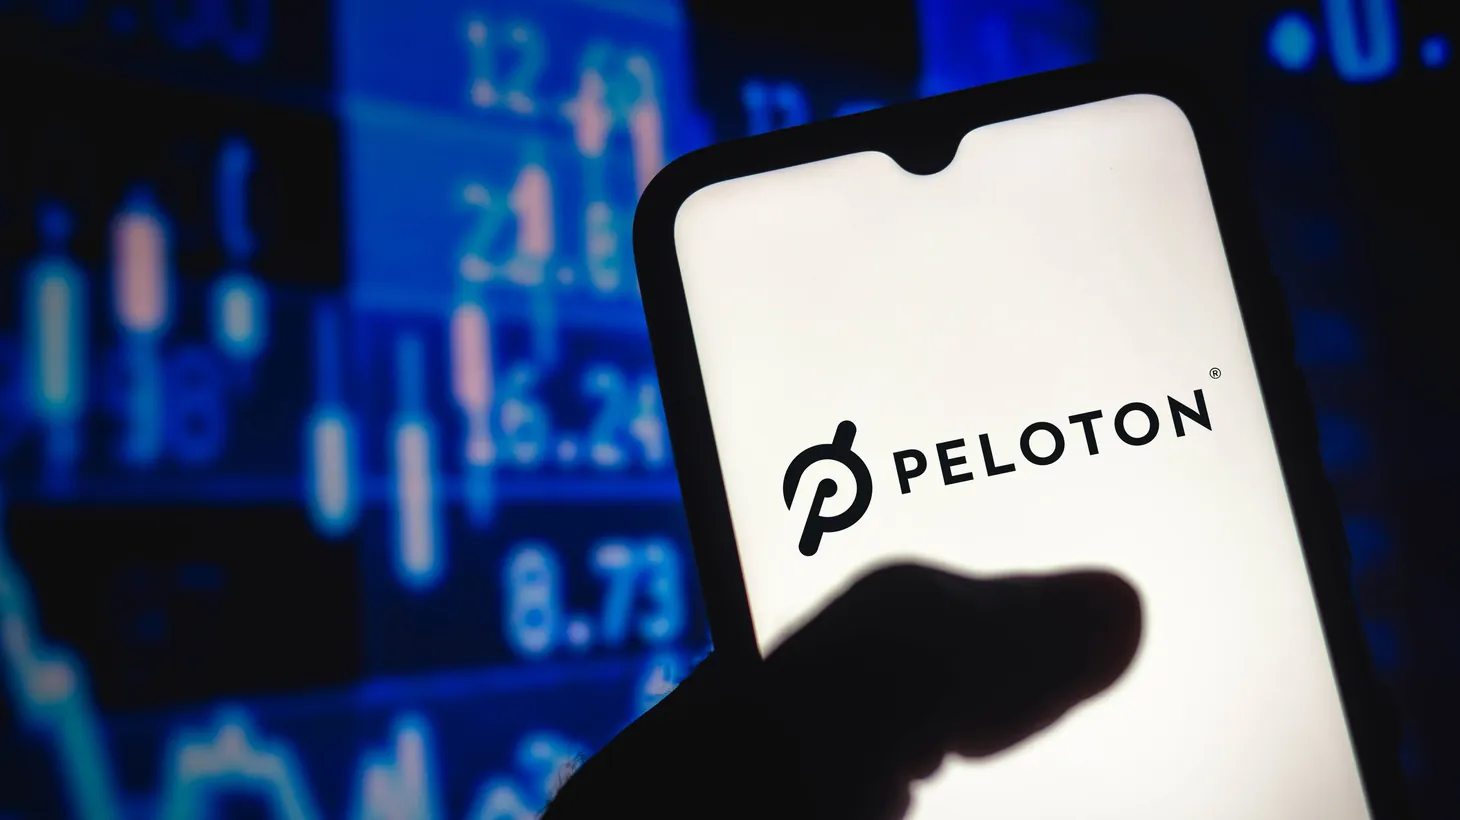 “The death of Peloton is going to be just as exaggerated as the massive peak of Peloton,” says Simeon Siegel, managing director of BMO Capital Markets.